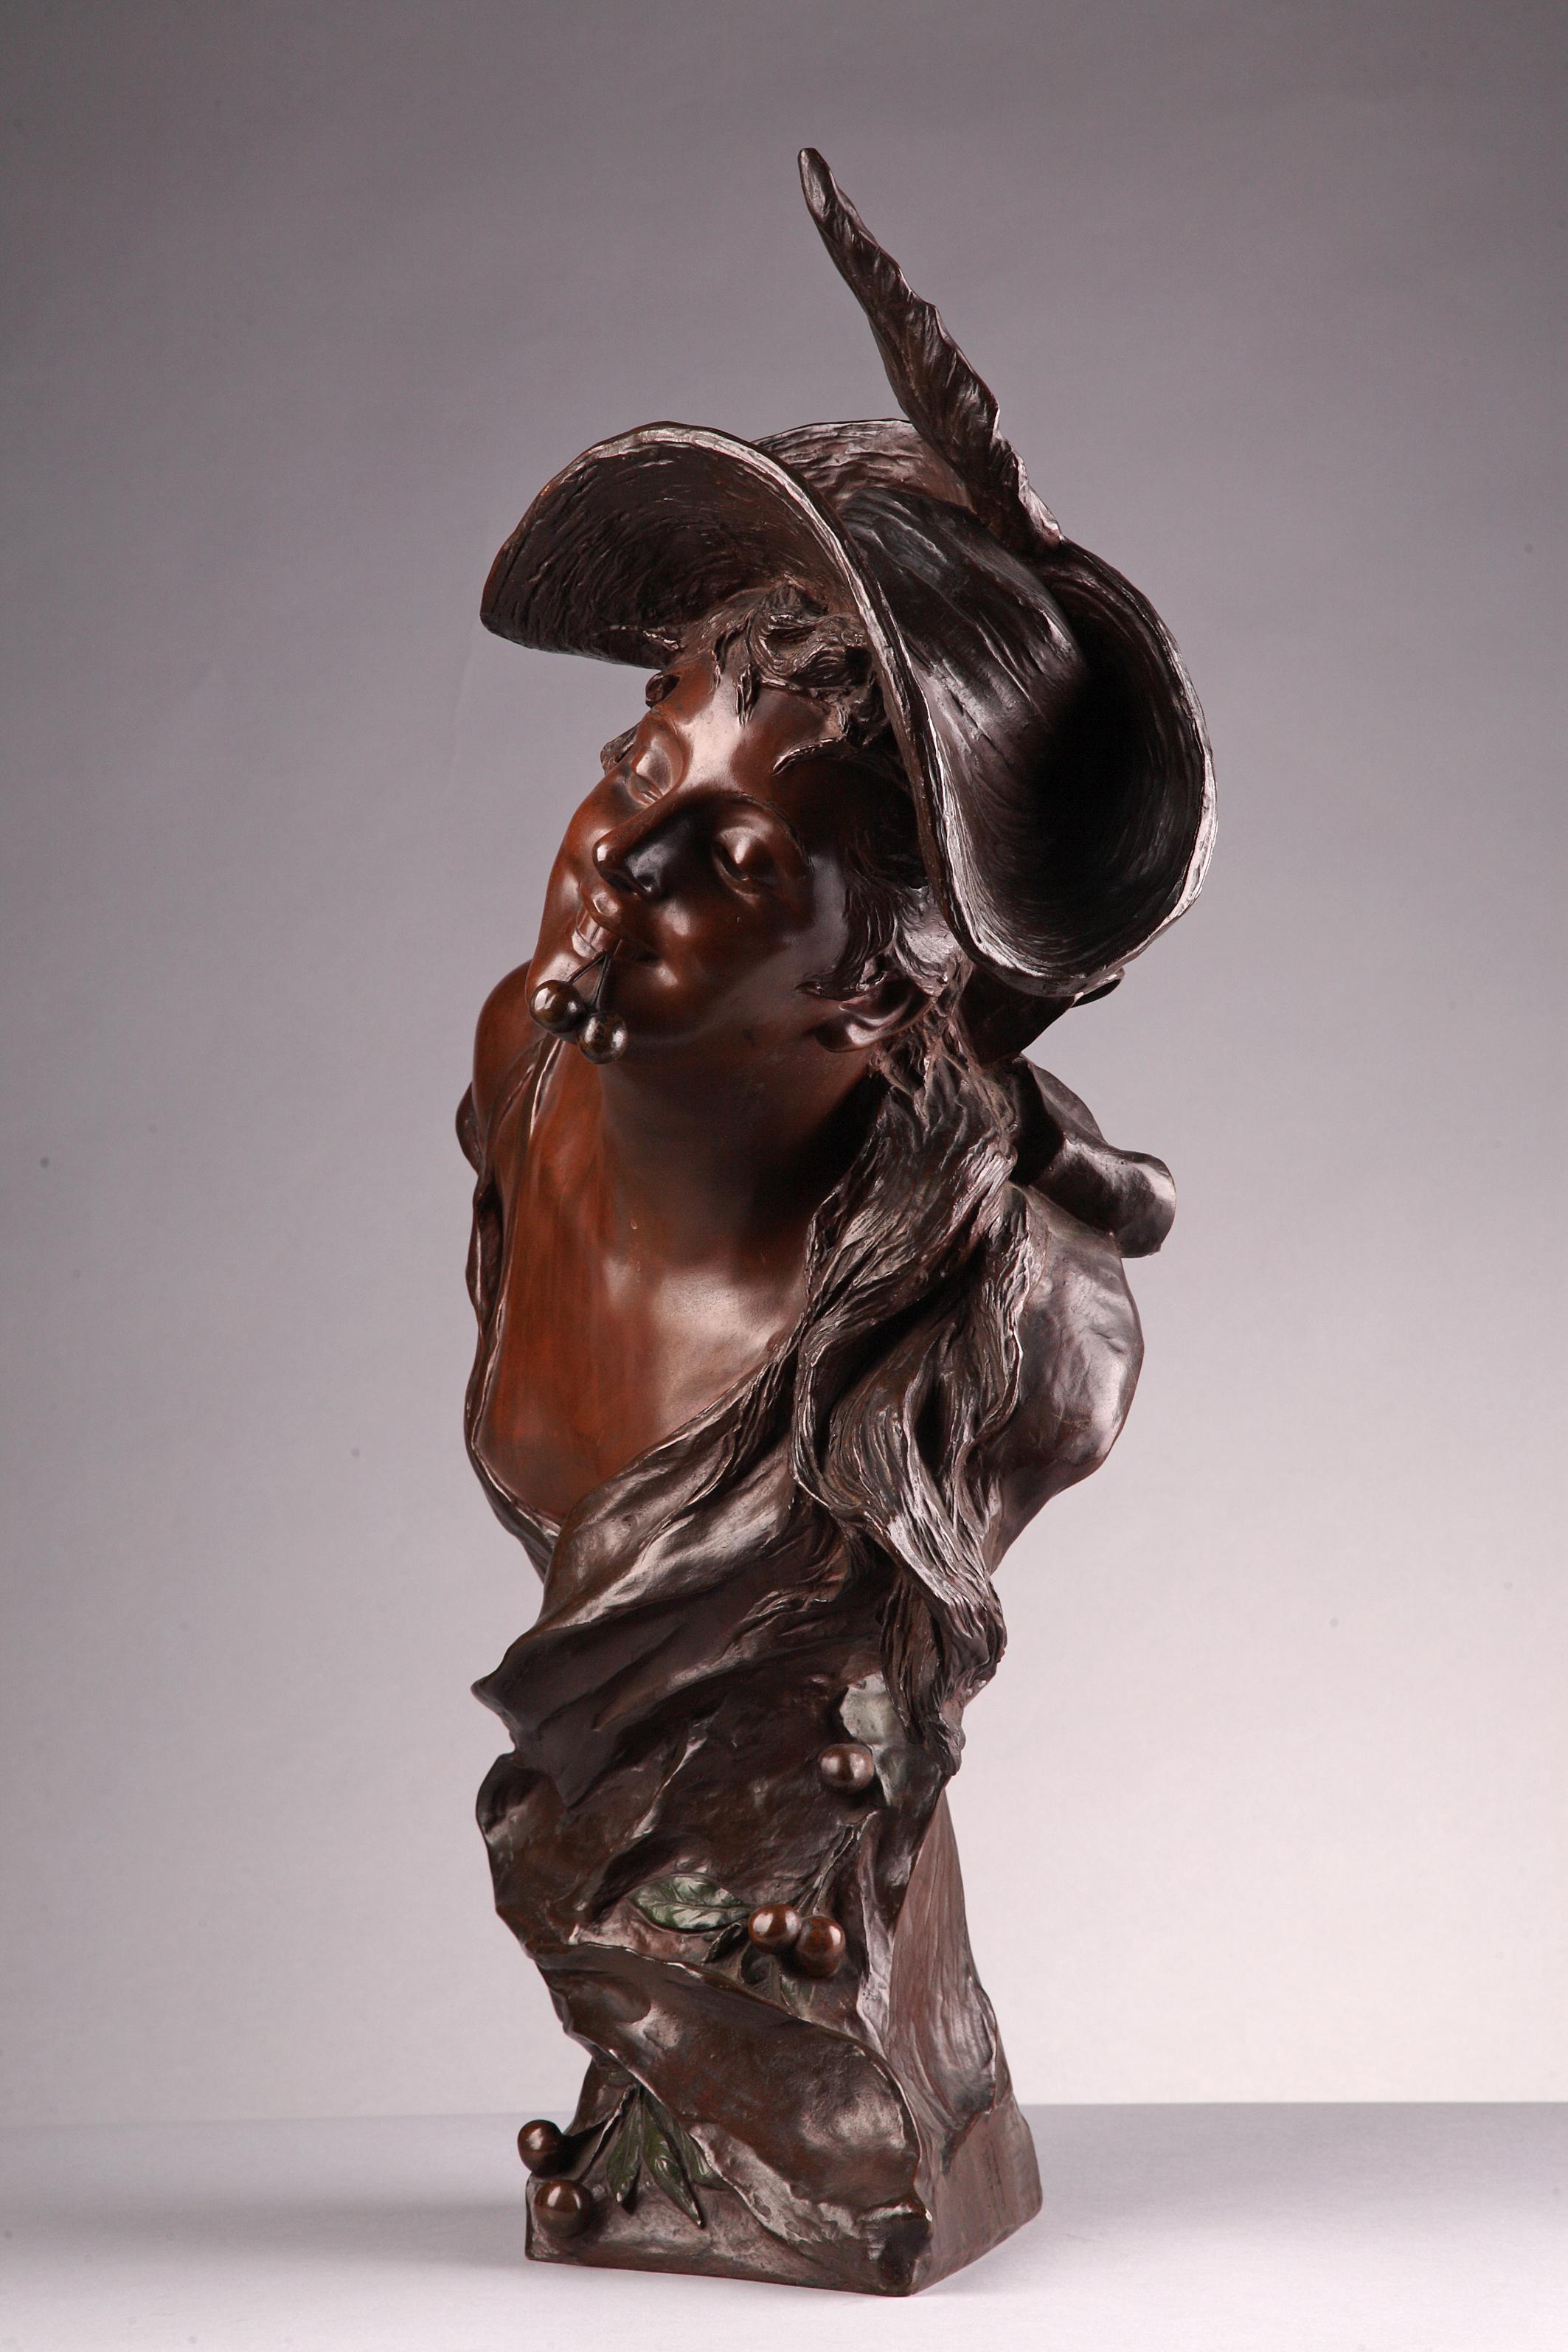 Signed Van der Straeten and Société des bronzes de Paris.

Bronze bust by Van der Straeten with a brown patina, the bronze base draped with the girl’s clothes and ornamented with cherries, with their original polychrome patina. 
Bust listed in